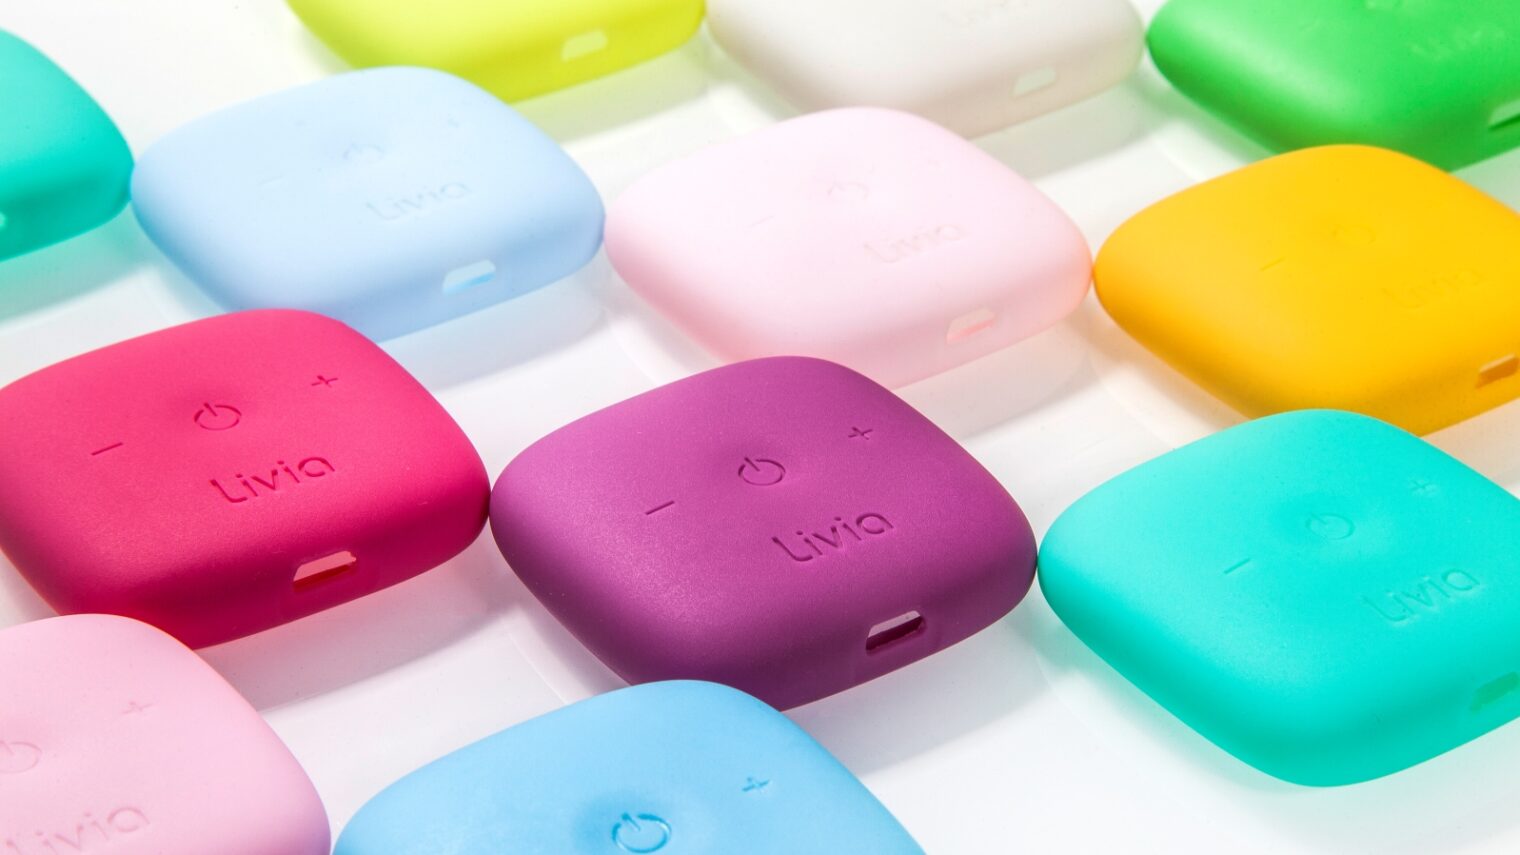 The pain-blocking wearable device comes in an assortment of colors. Photo courtesy of Livia